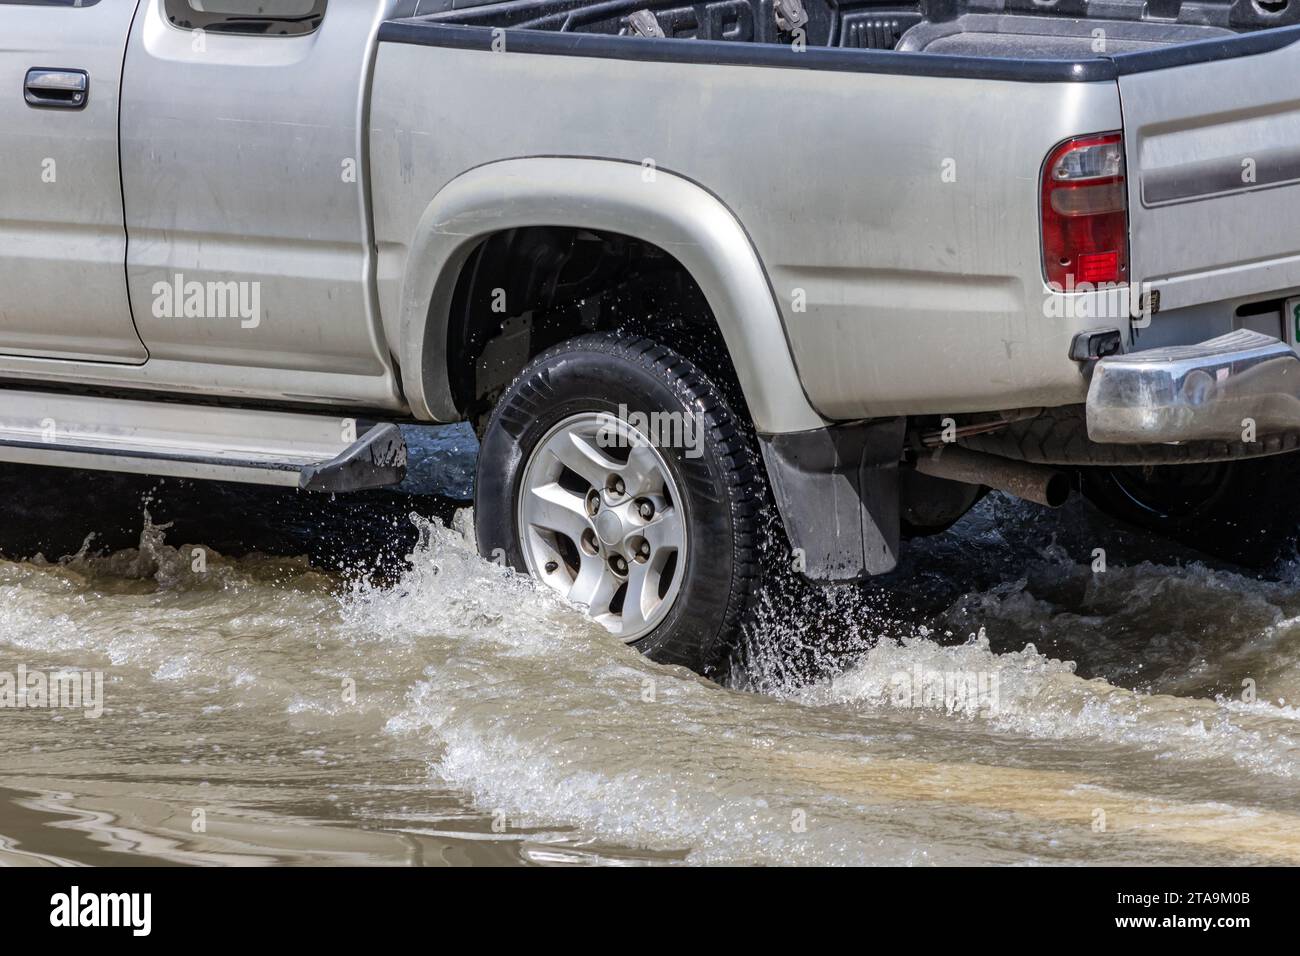 A pickup truck drives through a flooded street in the city, Bangkok, Thailand Stock Photo